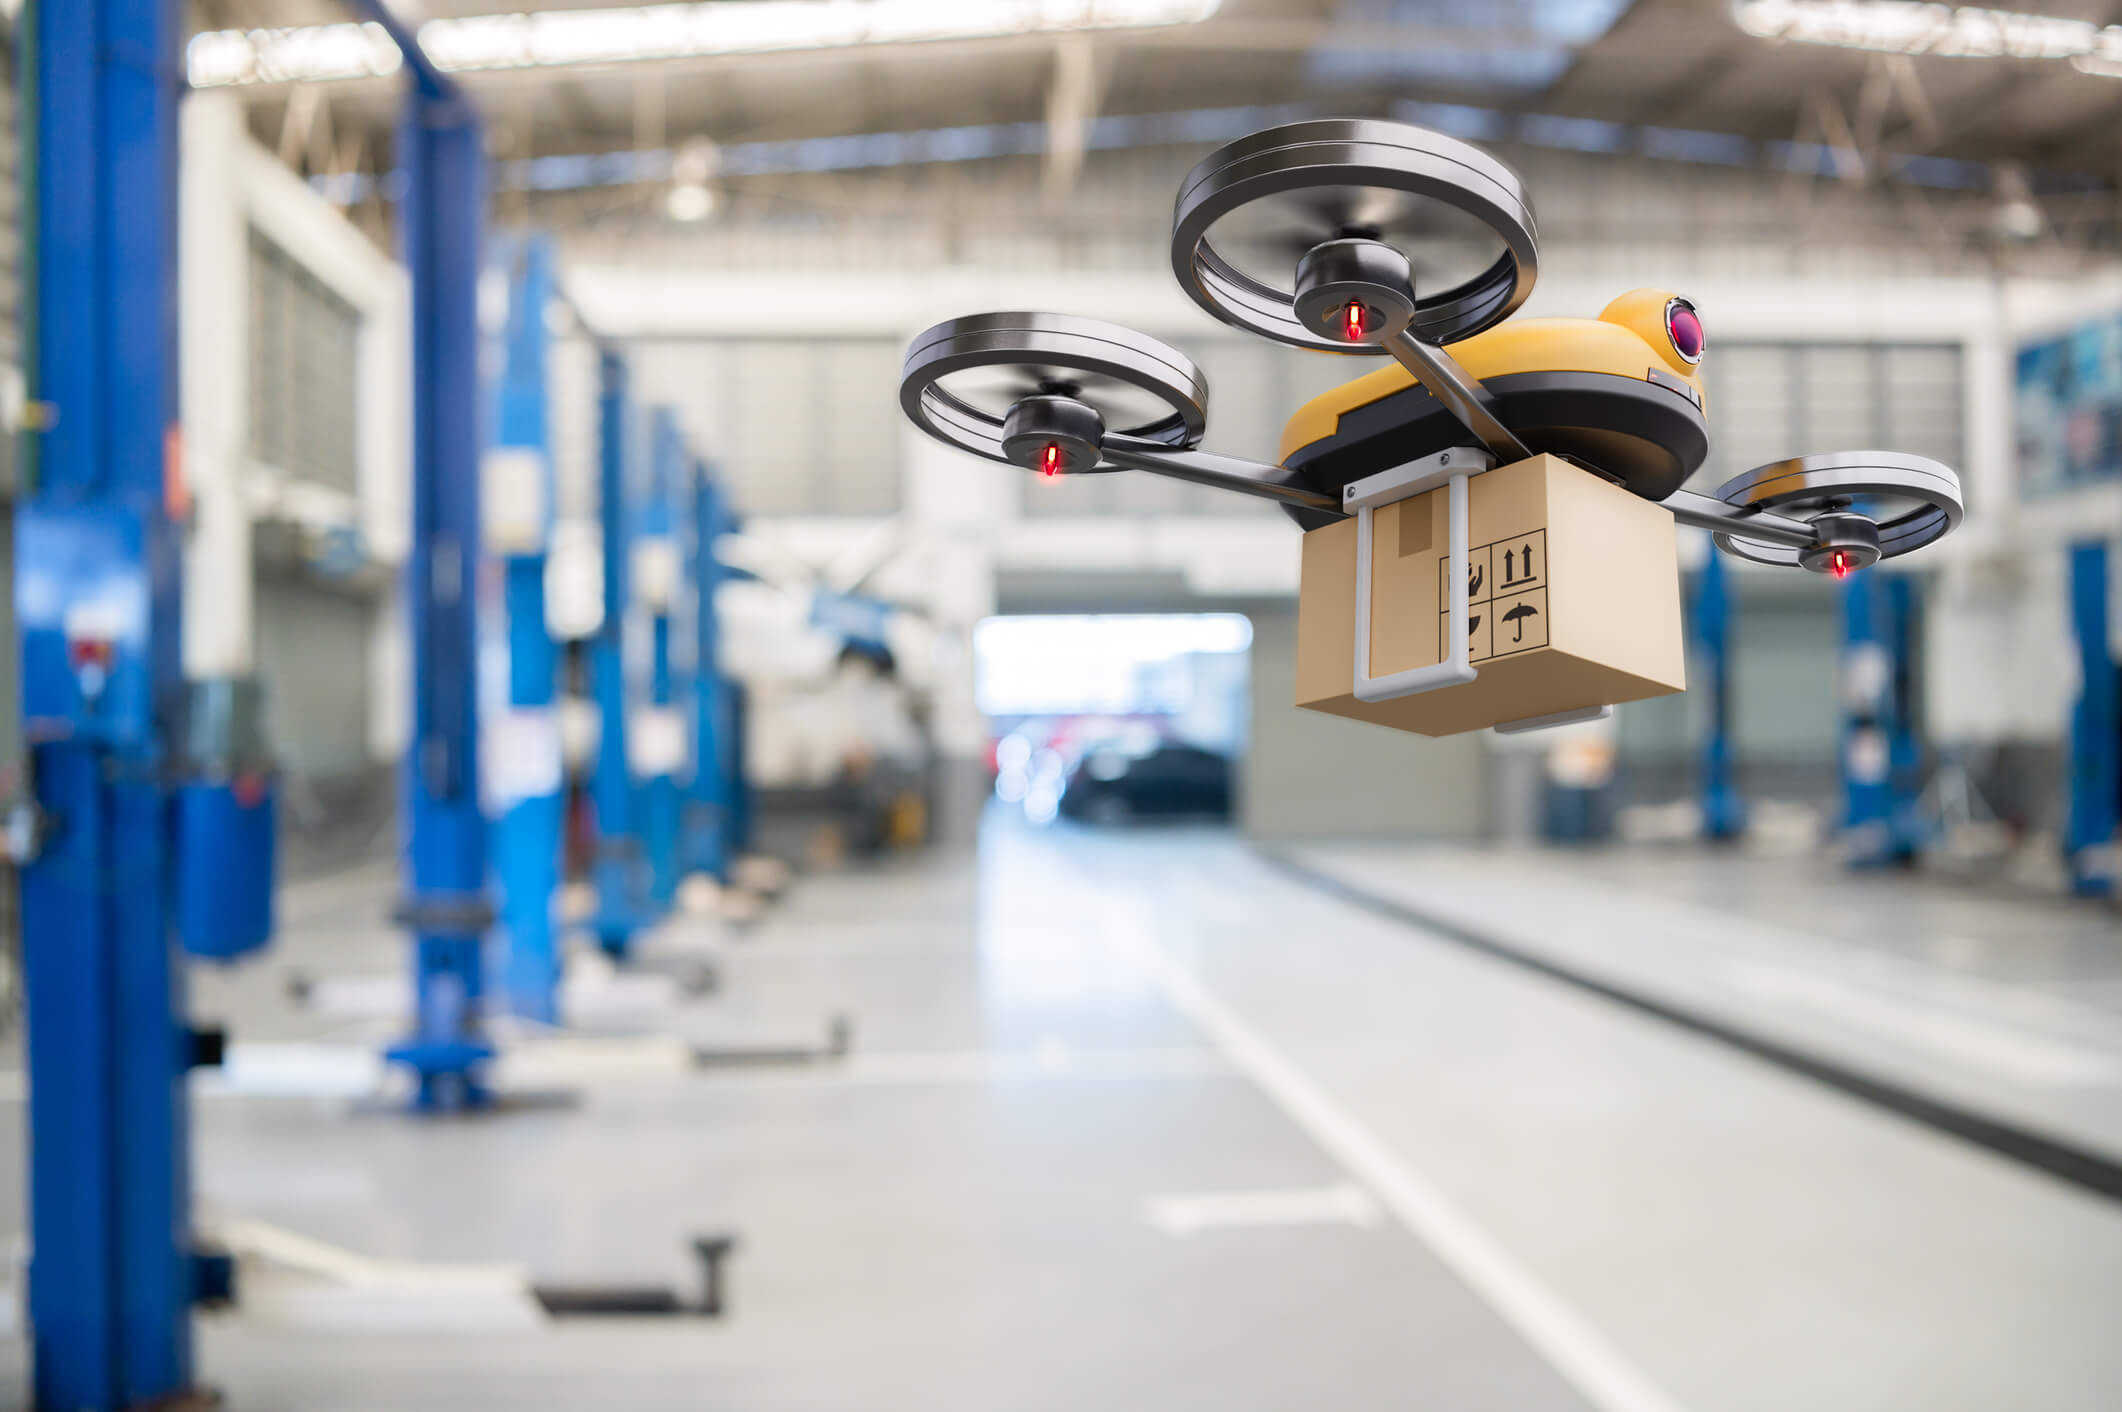 Using drones to move boxes in a warehouse